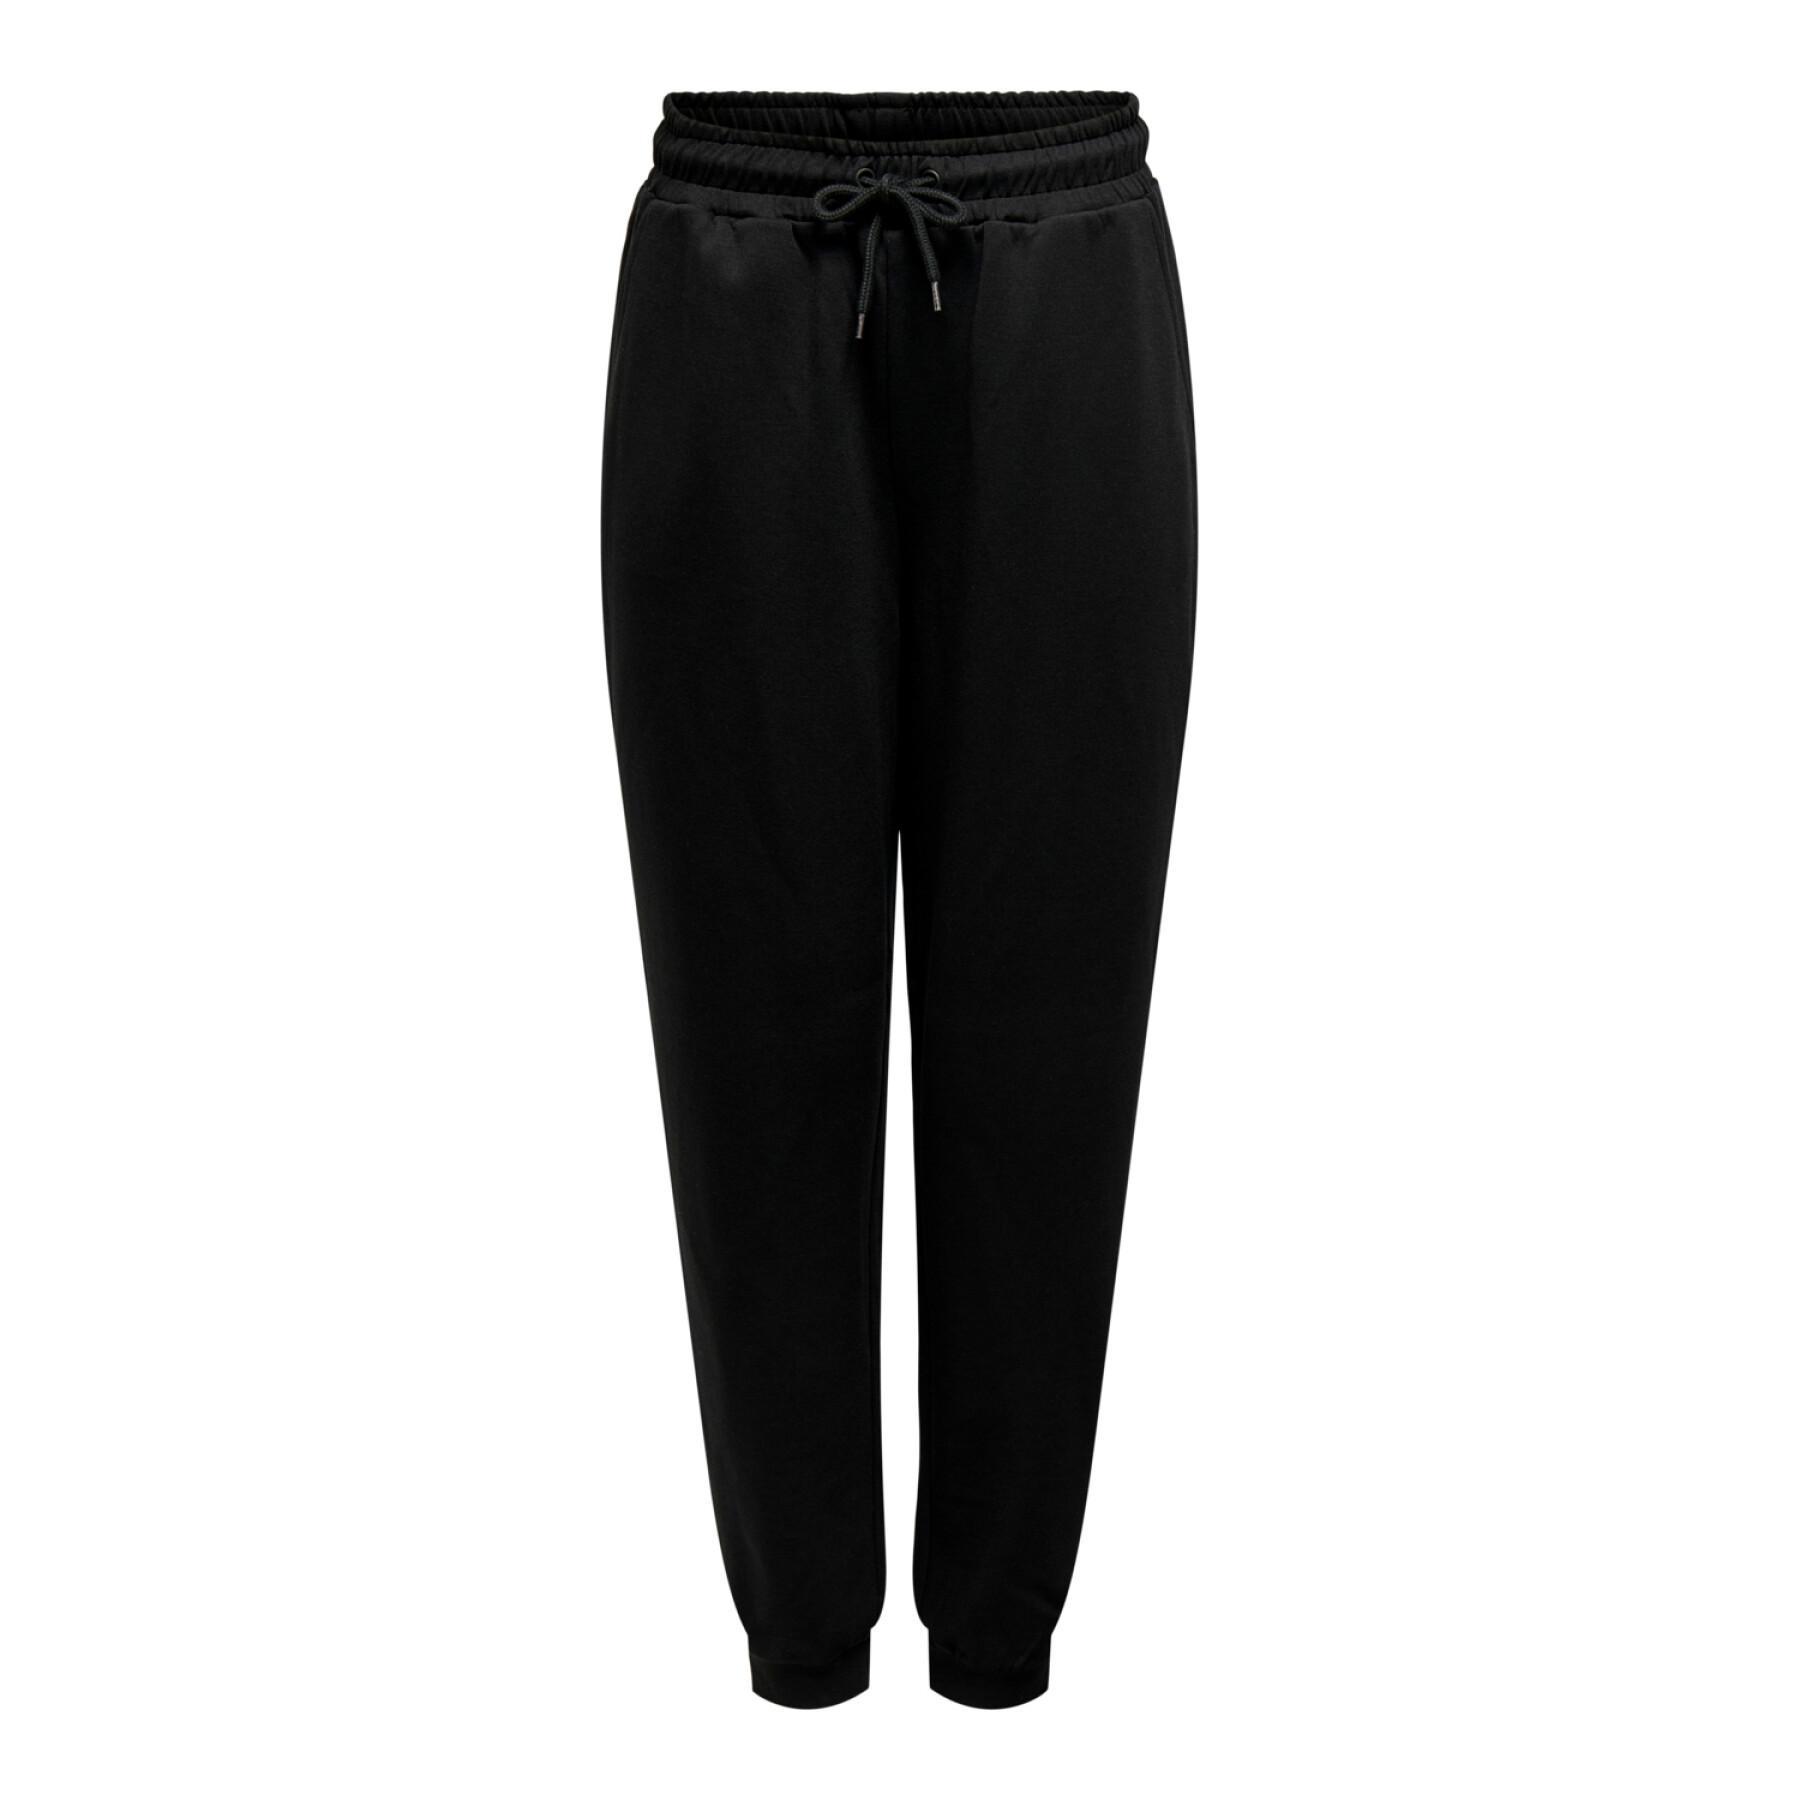 Women's sweatpants Only play onplounge